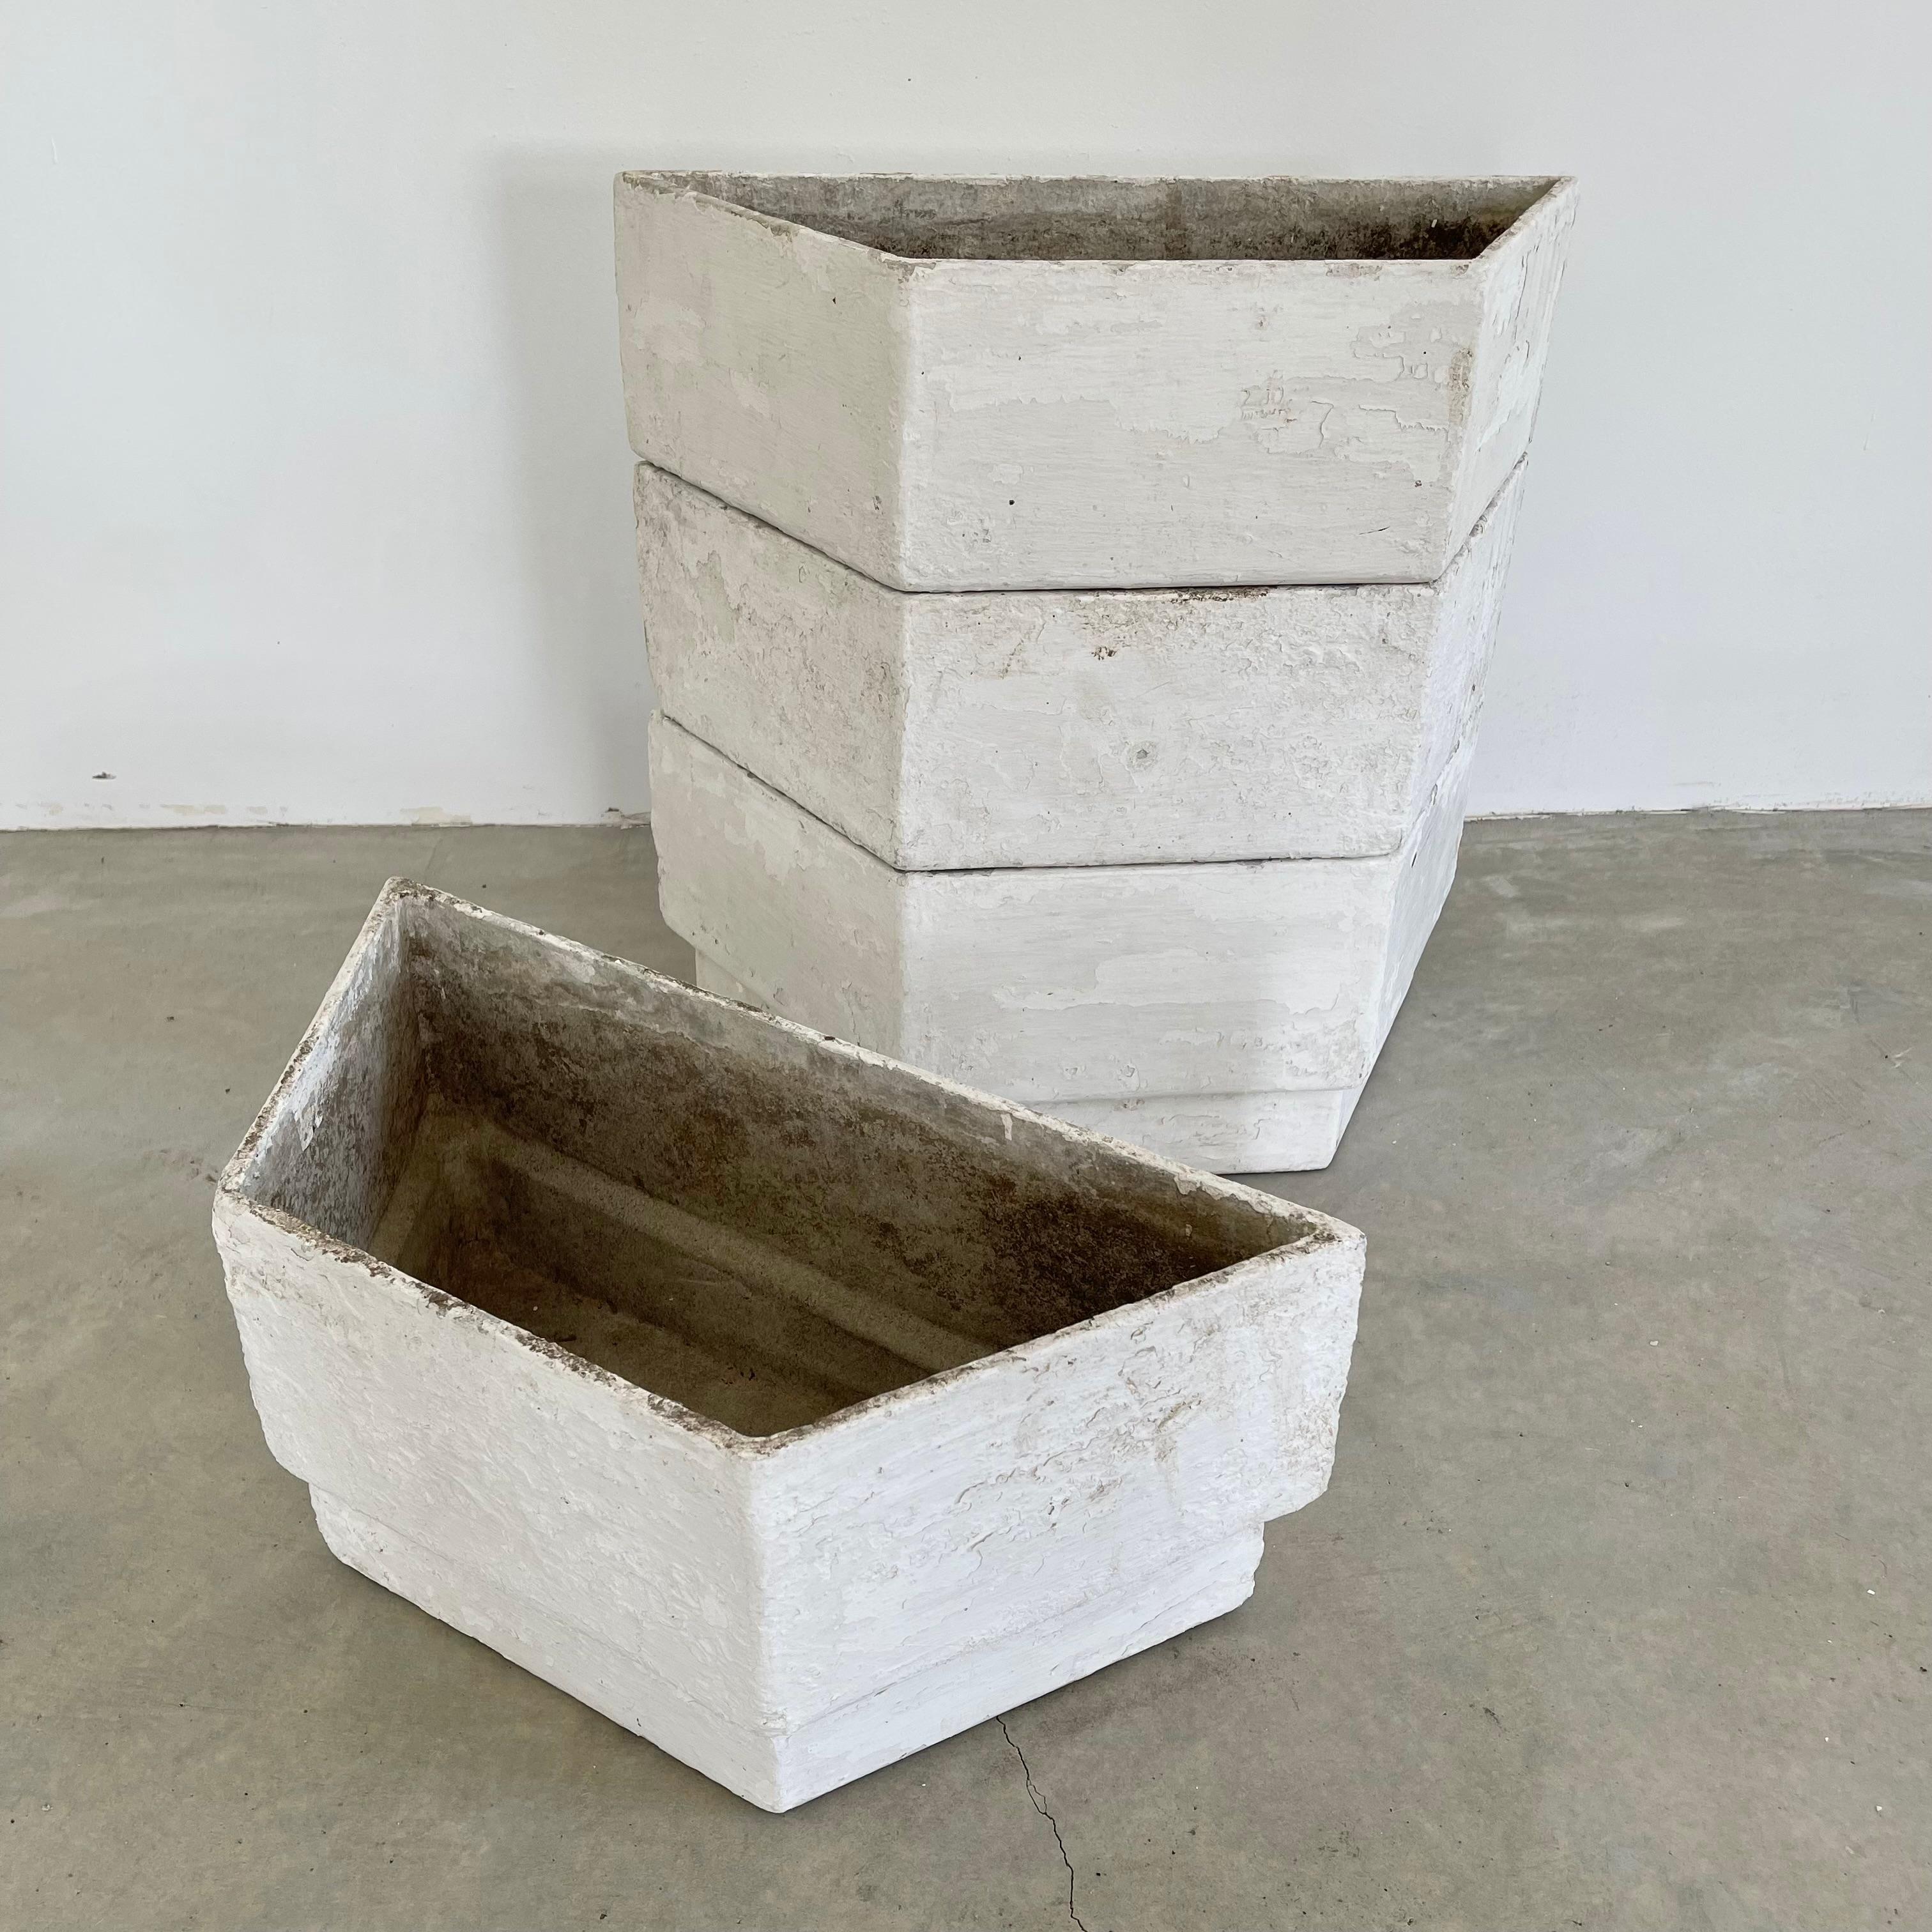 Unique set of trapezoid stacking concrete planters by Swiss Architect Willy Guhl. All trapezoids share the same dimensions. Pieces can be arranged in a multitude of ways. Gorgeous detail. Excellent patina and age to concrete. Cool sculpture for